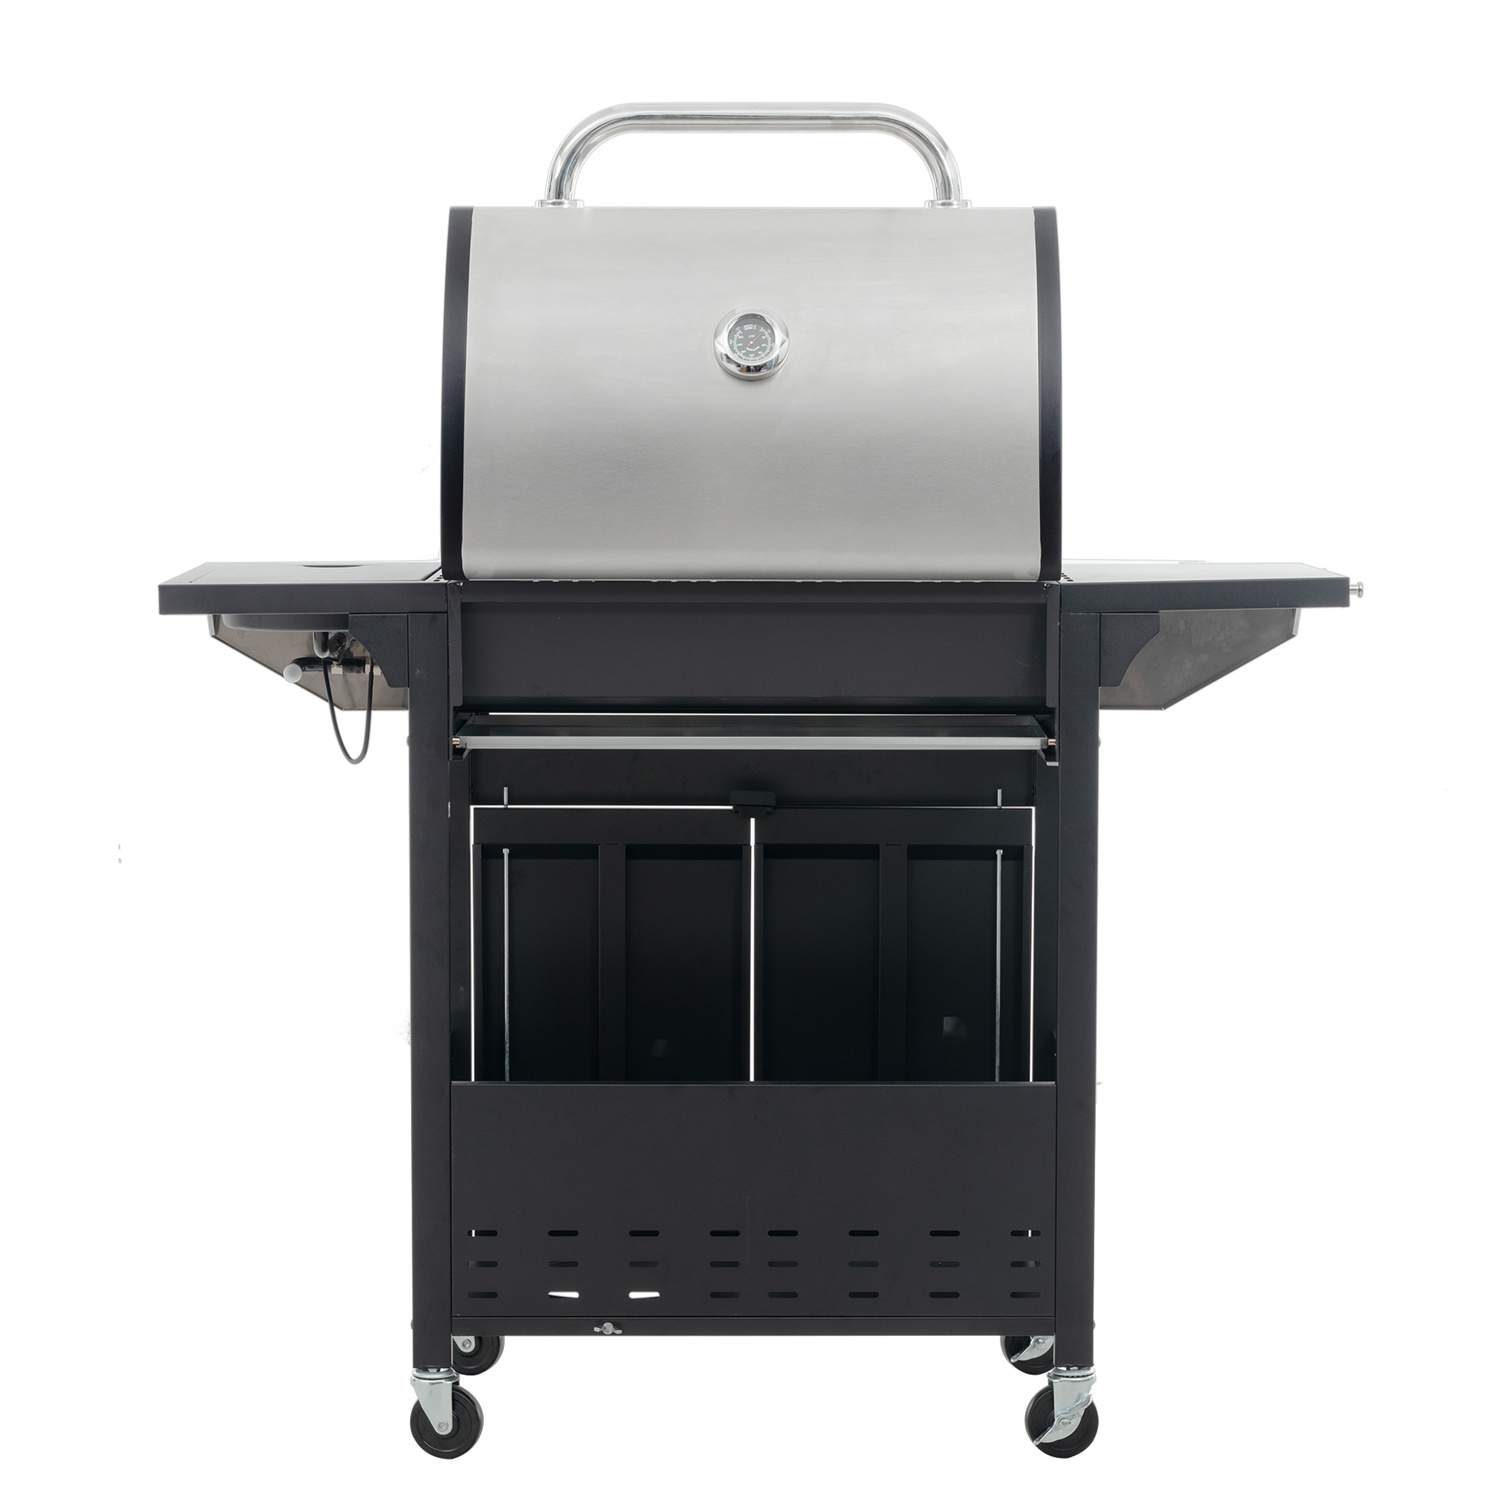 Highsound 4-Burner Propane Gas Grill, Porcelain-Enameled Cast Iron Grates 34,200 BTU Outdoor Cooking Stainless Steel BBQ Grills Cabinet - image 3 of 9